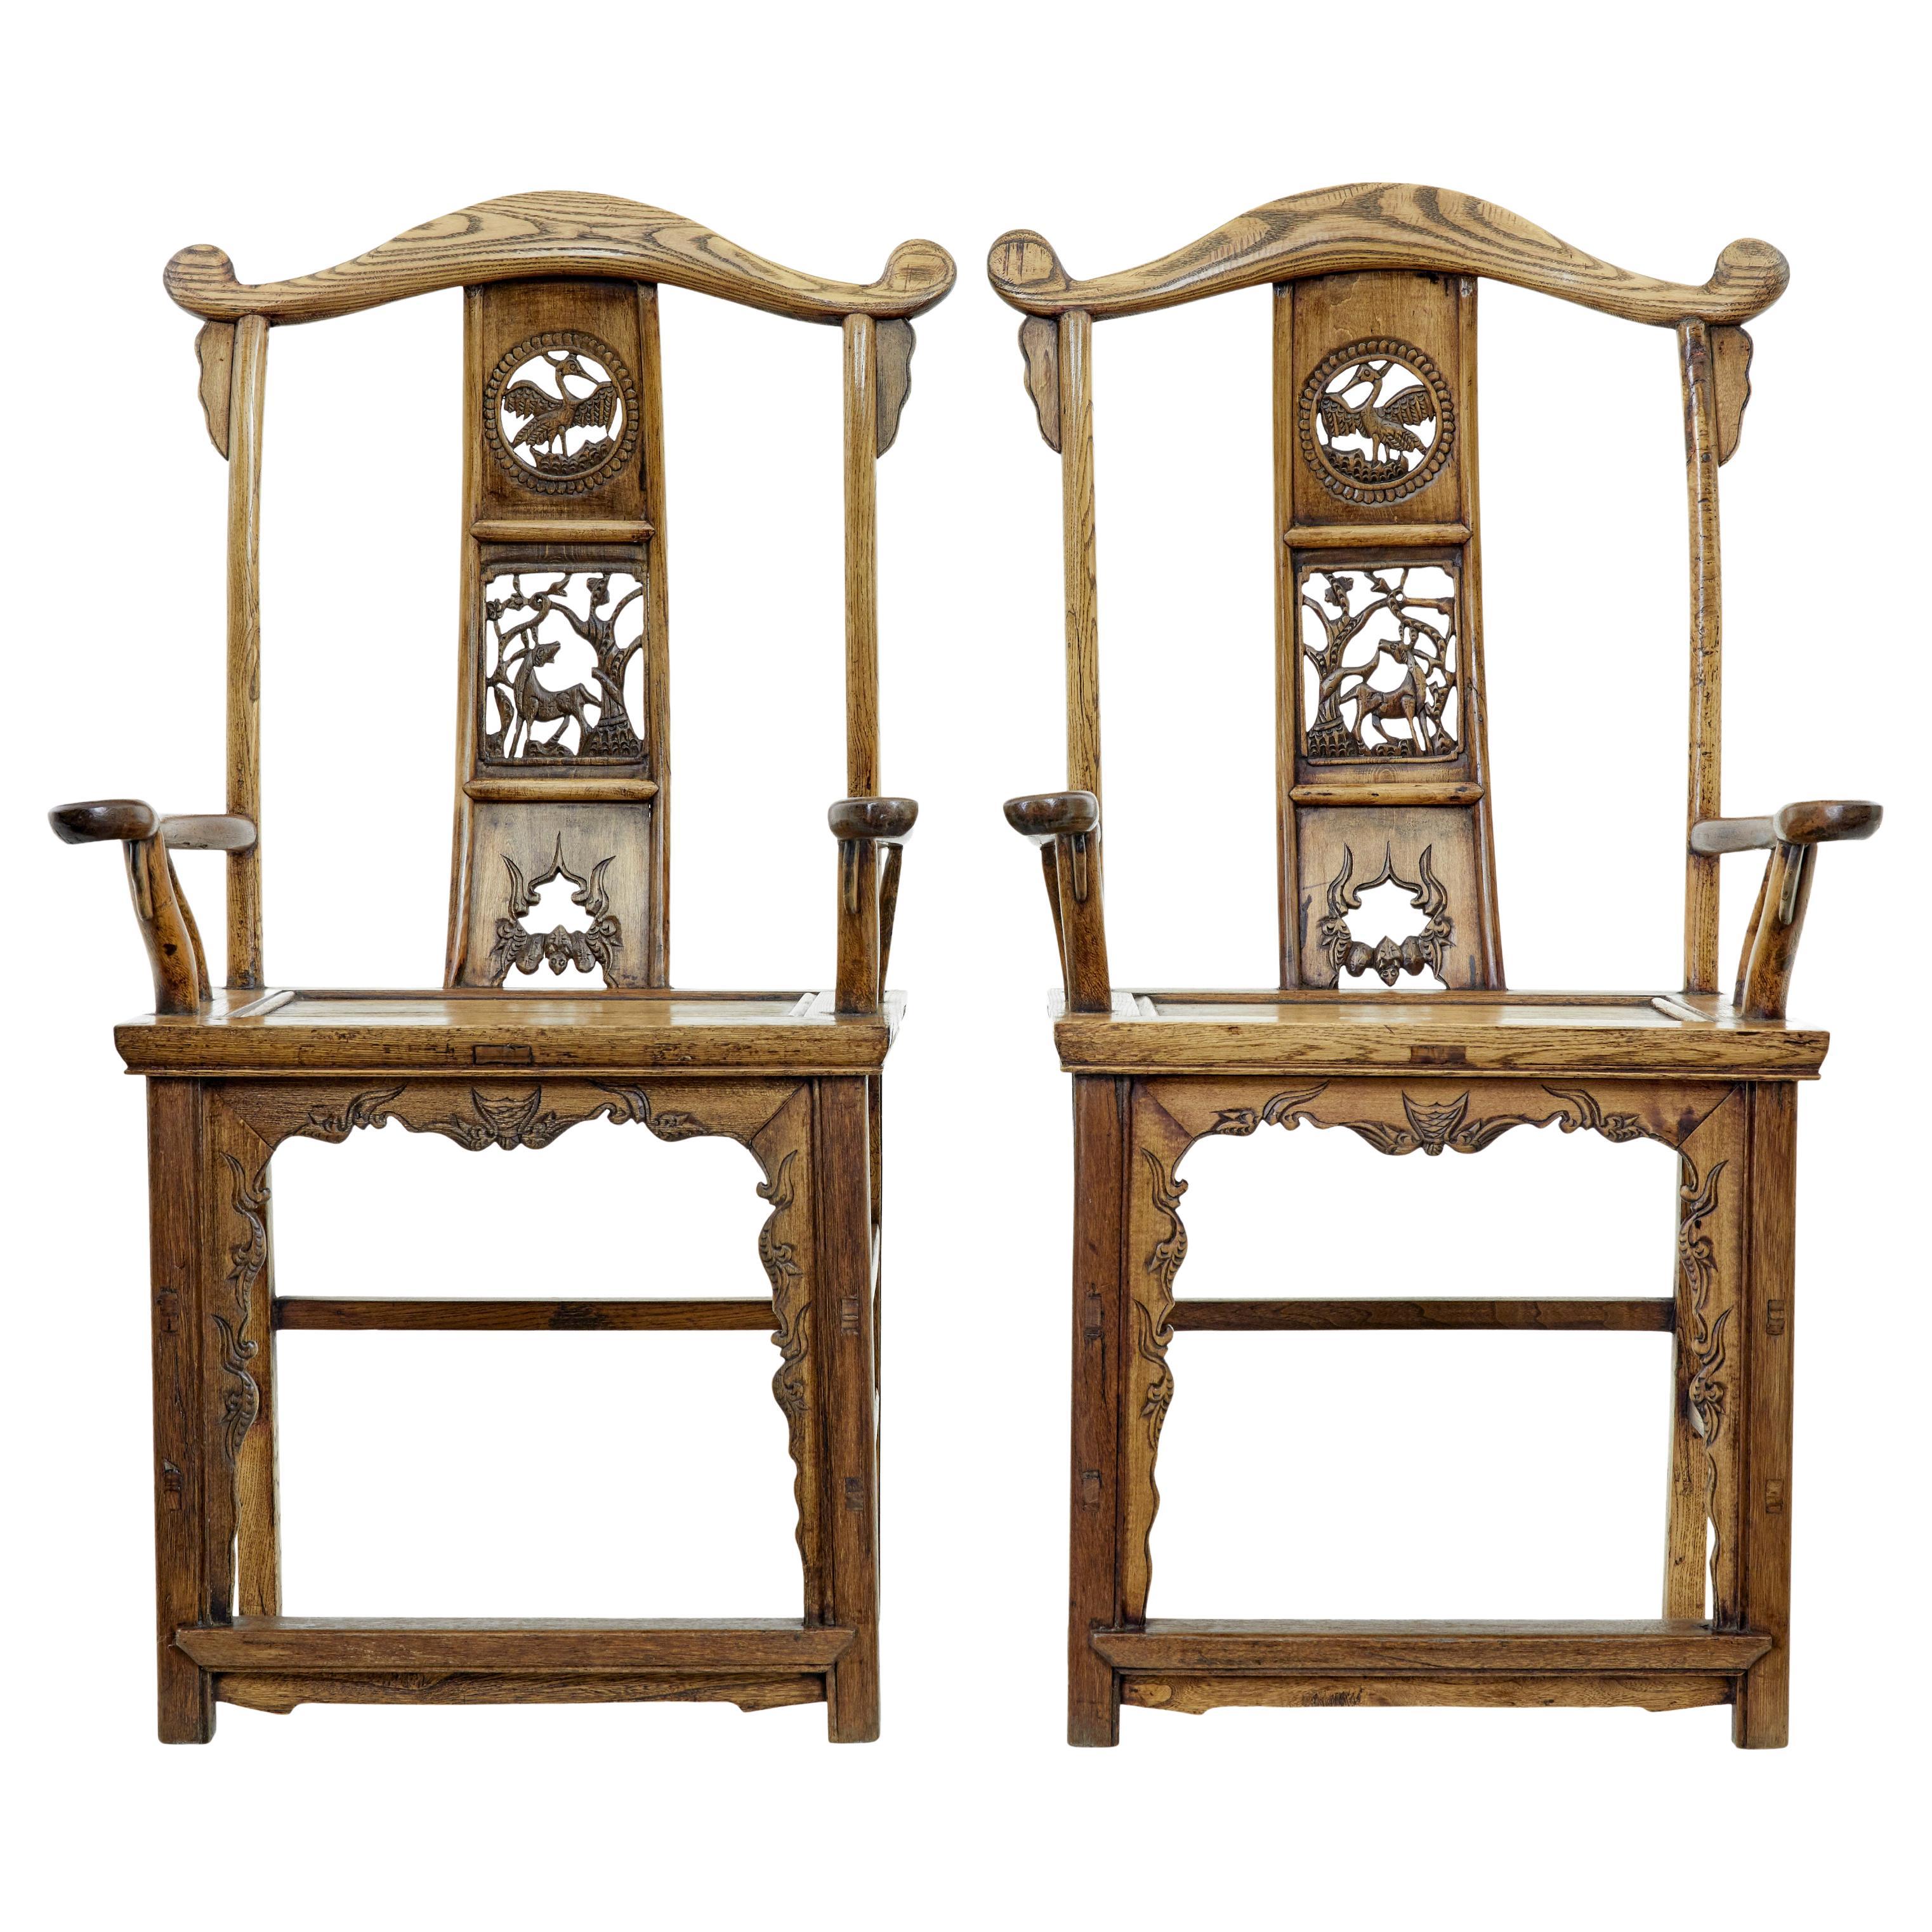 Pair of mid 19th century carved elm Chinese yoke back armchairs